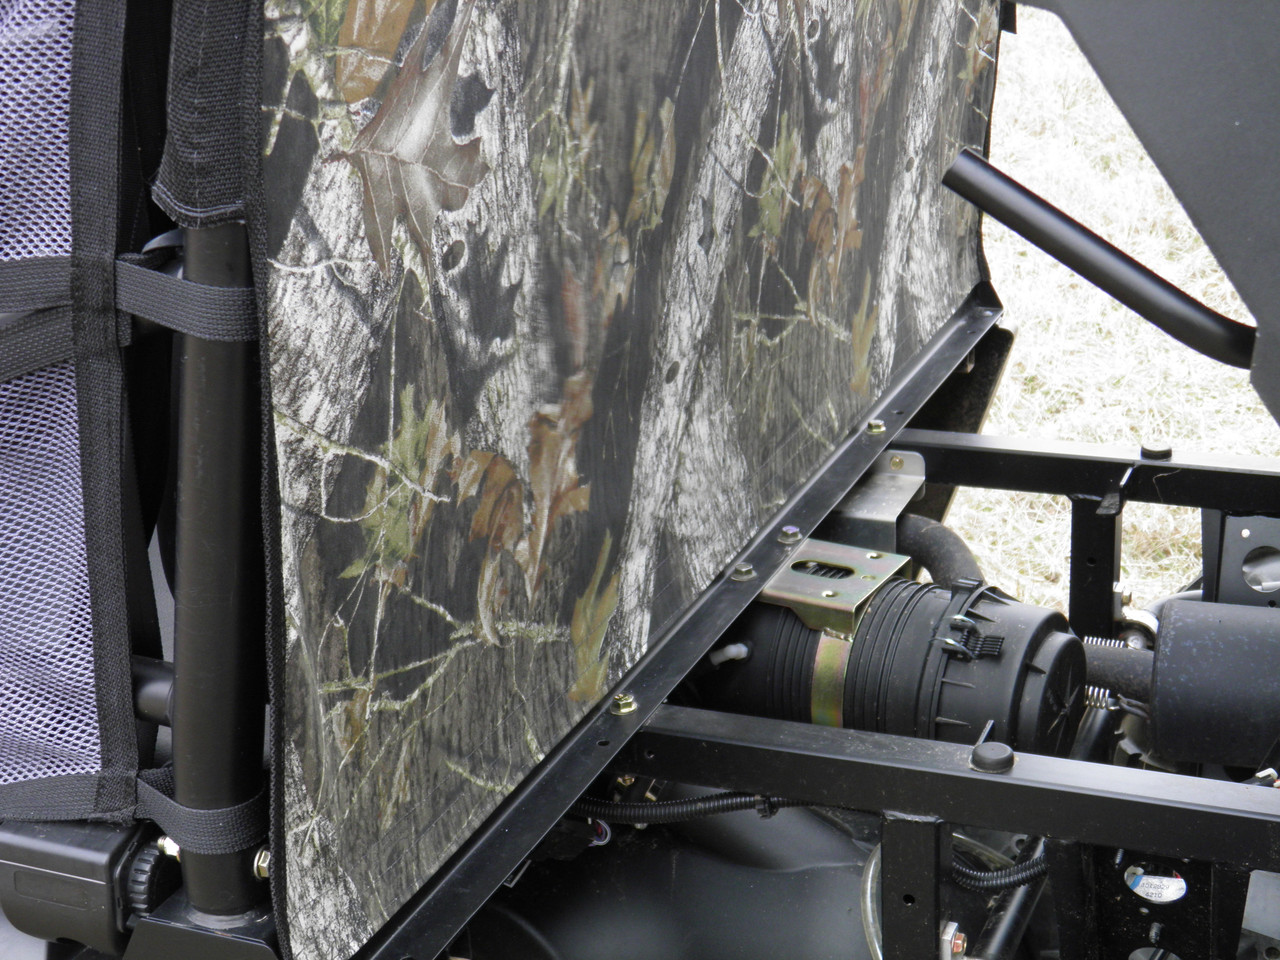 3 Star side x side Polaris Ranger Crew 570-6/800 vinyl windshield top and rear window close-up view